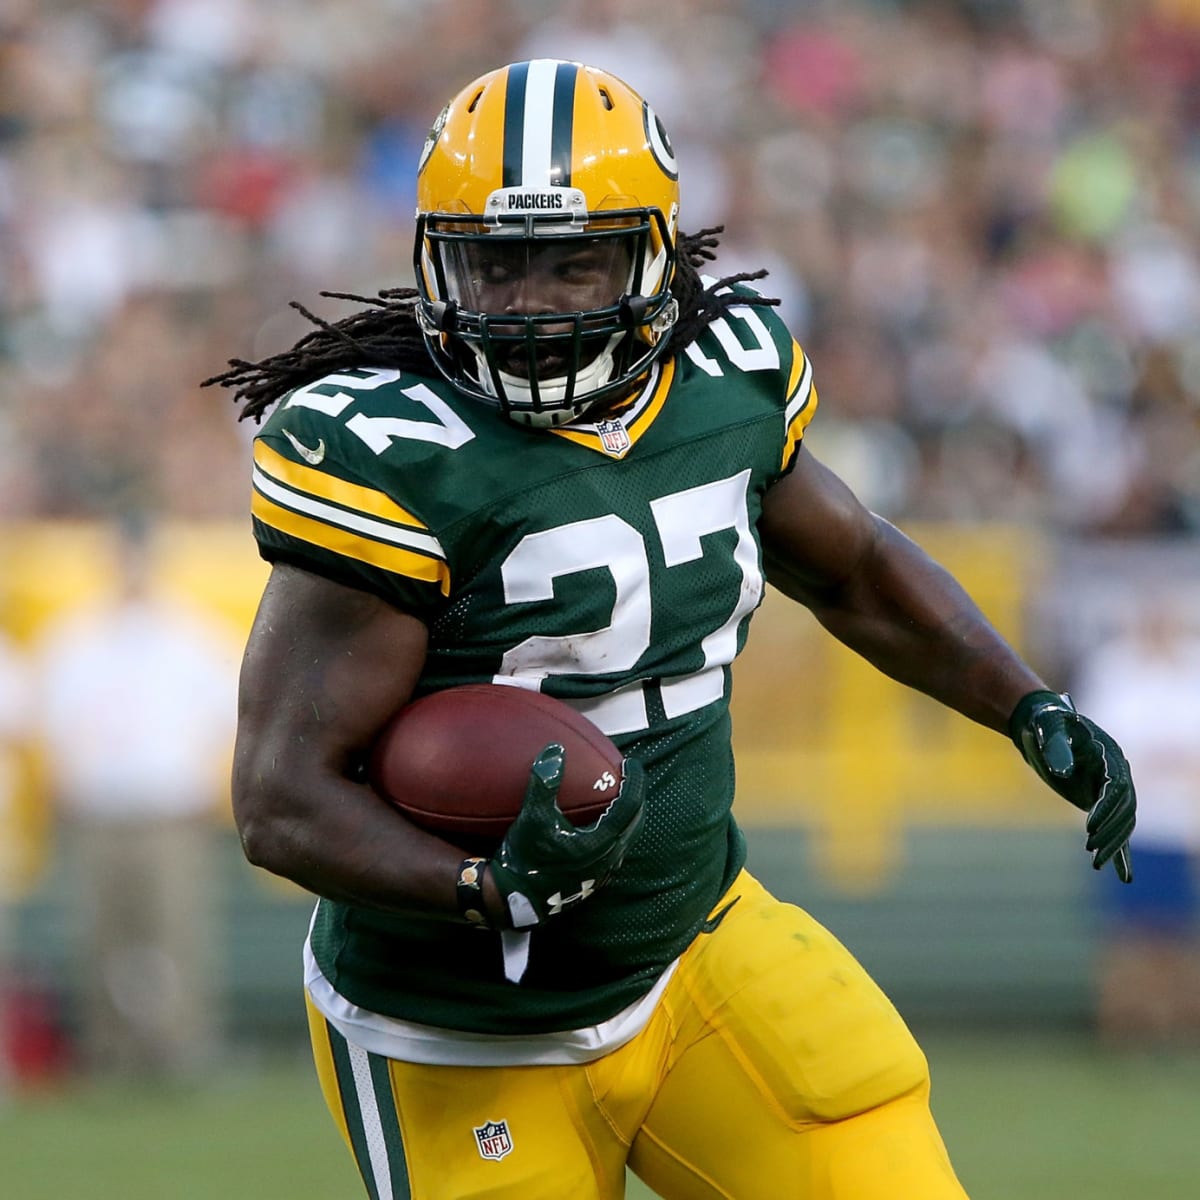 Eddie Lacy is turning weight loss into private cash cow